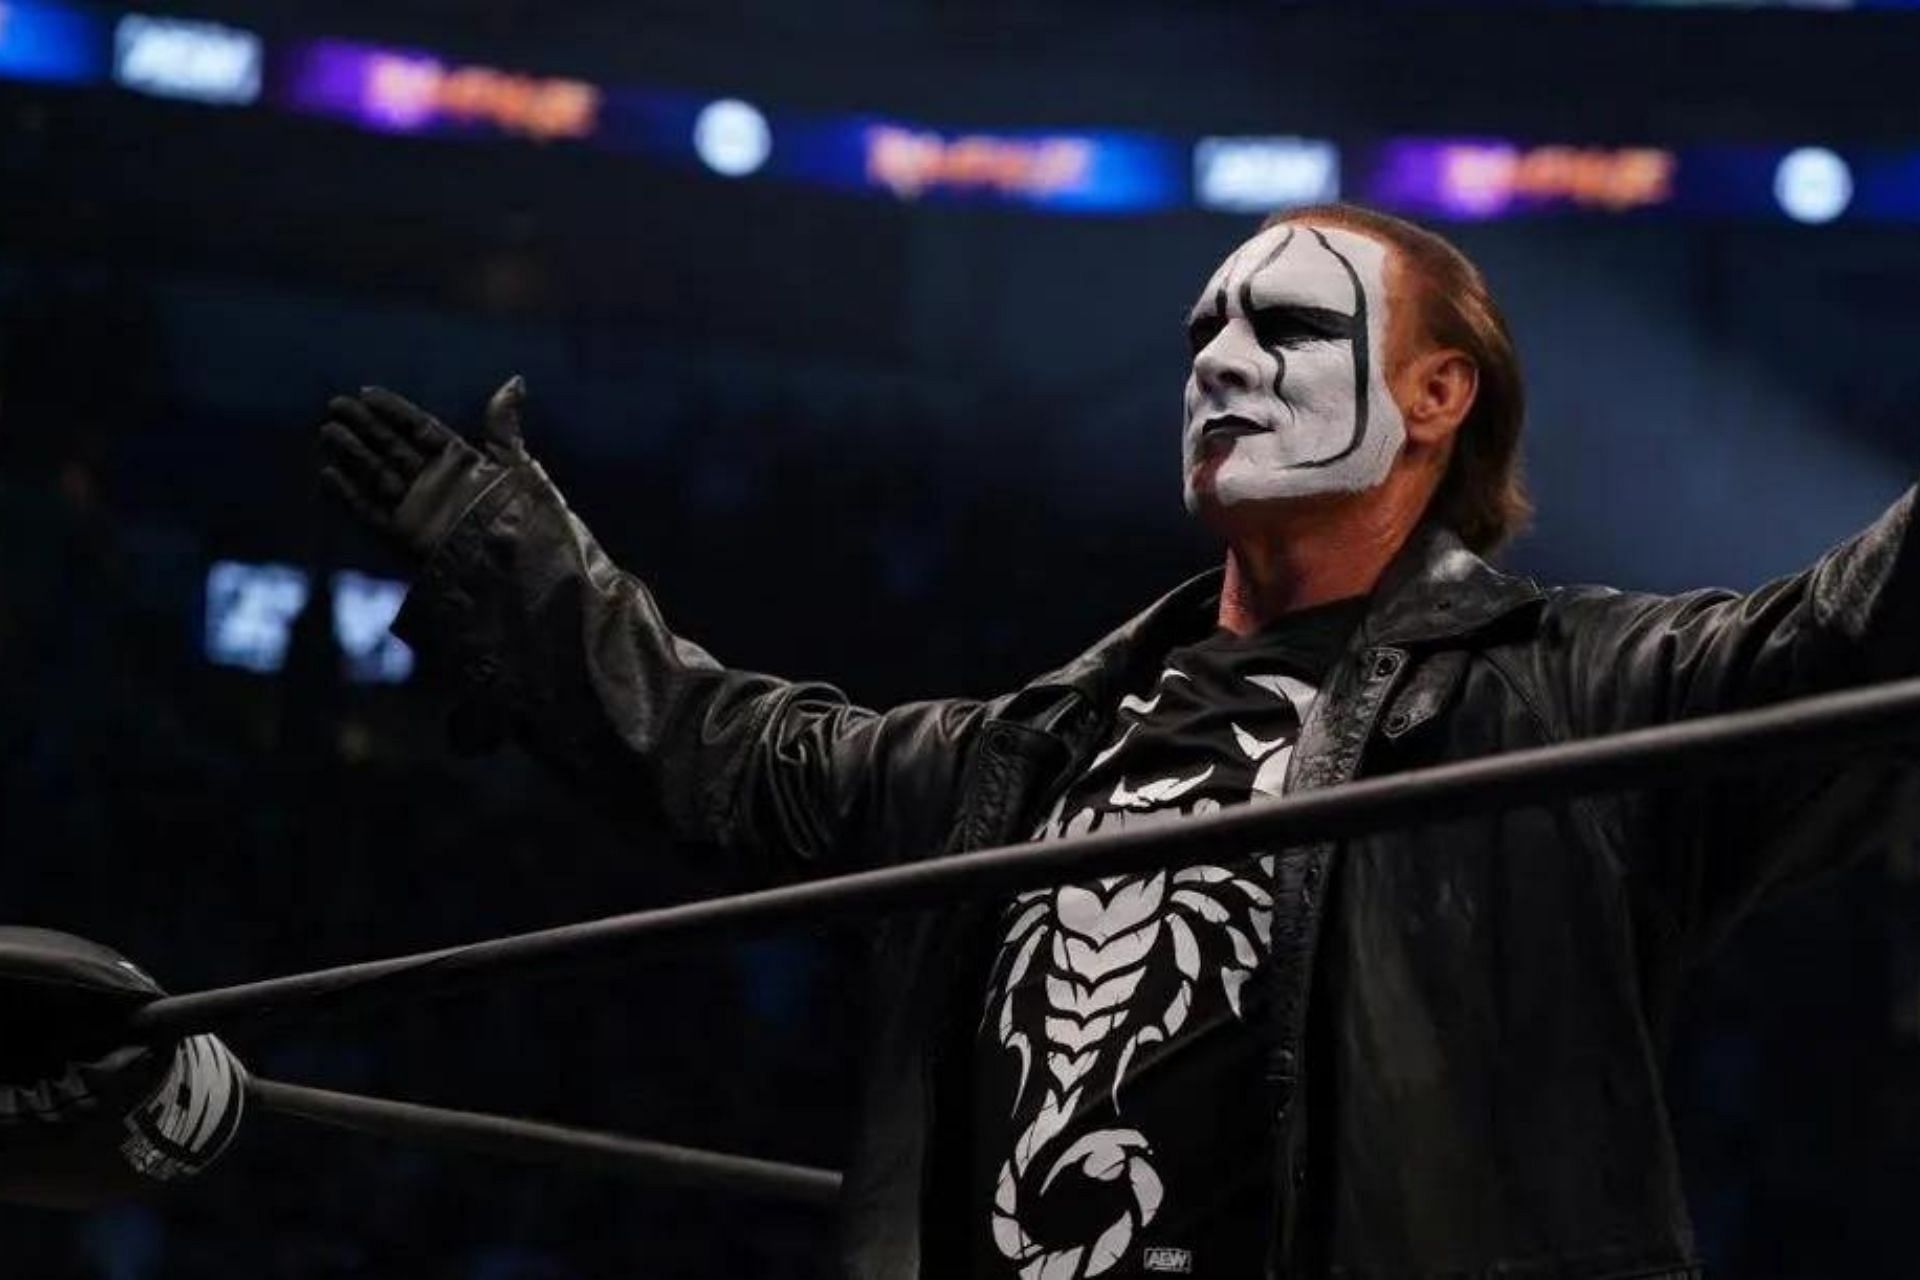 Eminent wrestling personalities are talking about Sting and his retirement